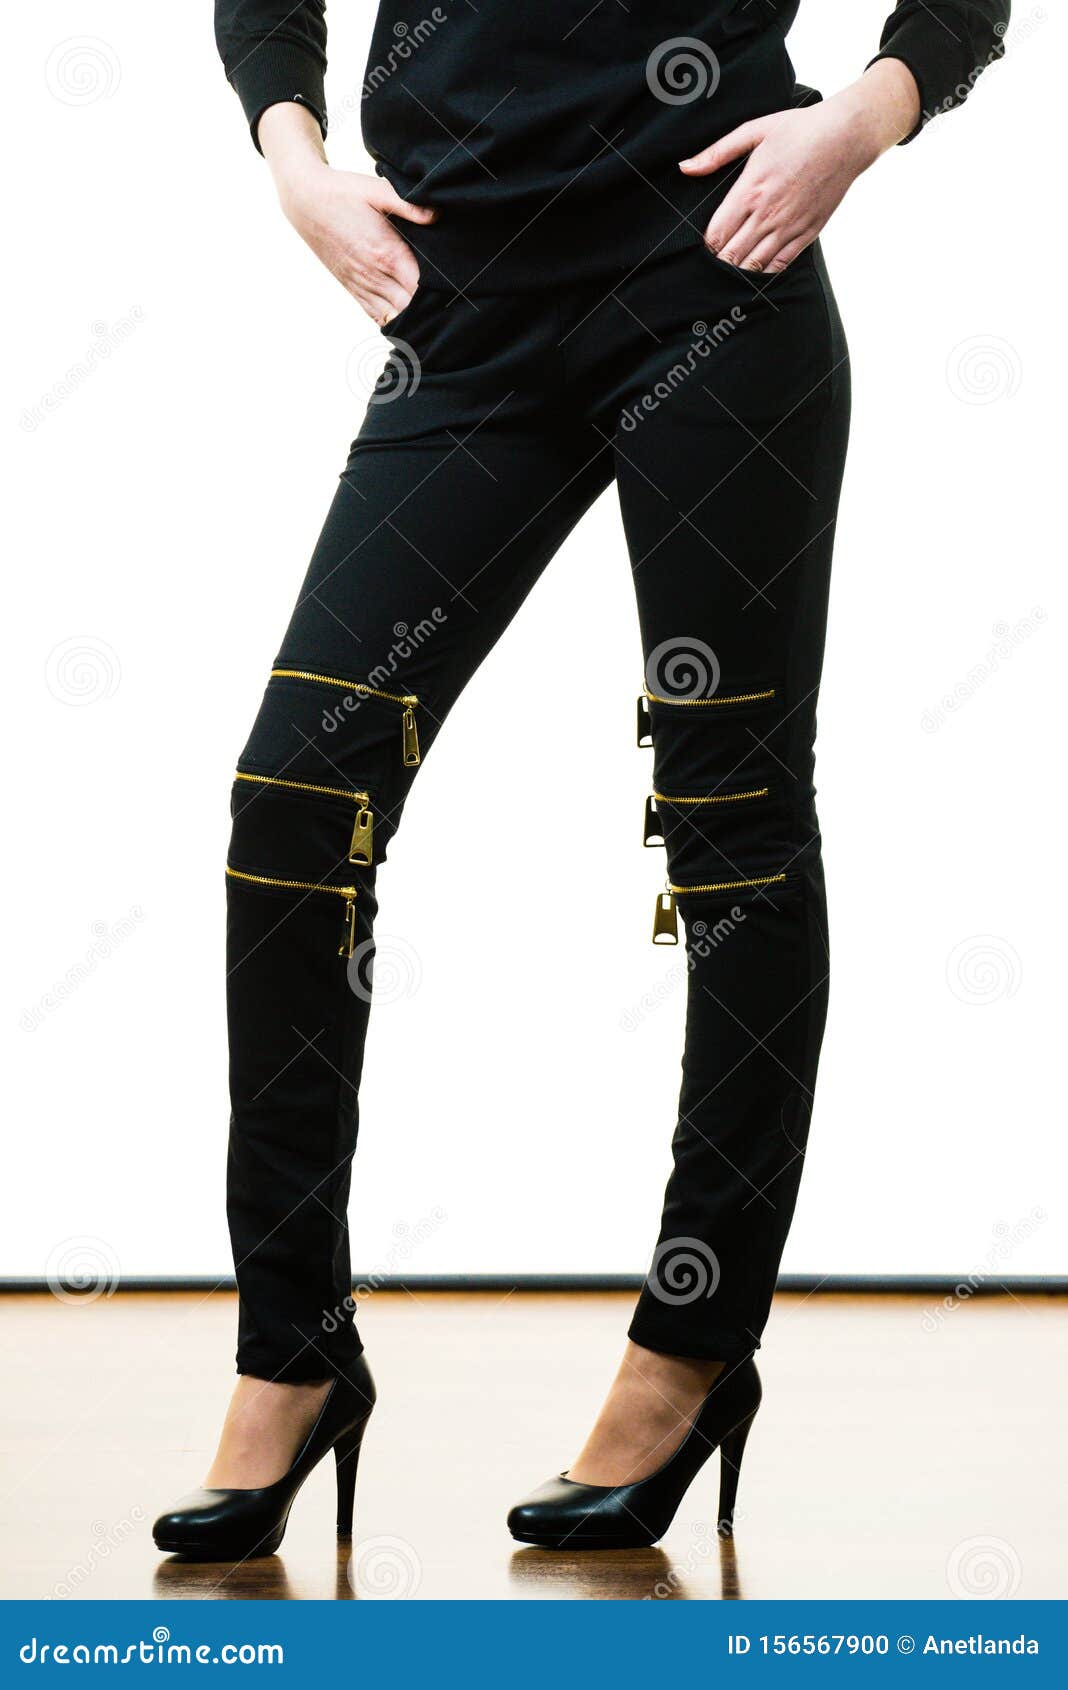 Black Jeans with High Heels Stock Photo - Image of detail, fashion ...